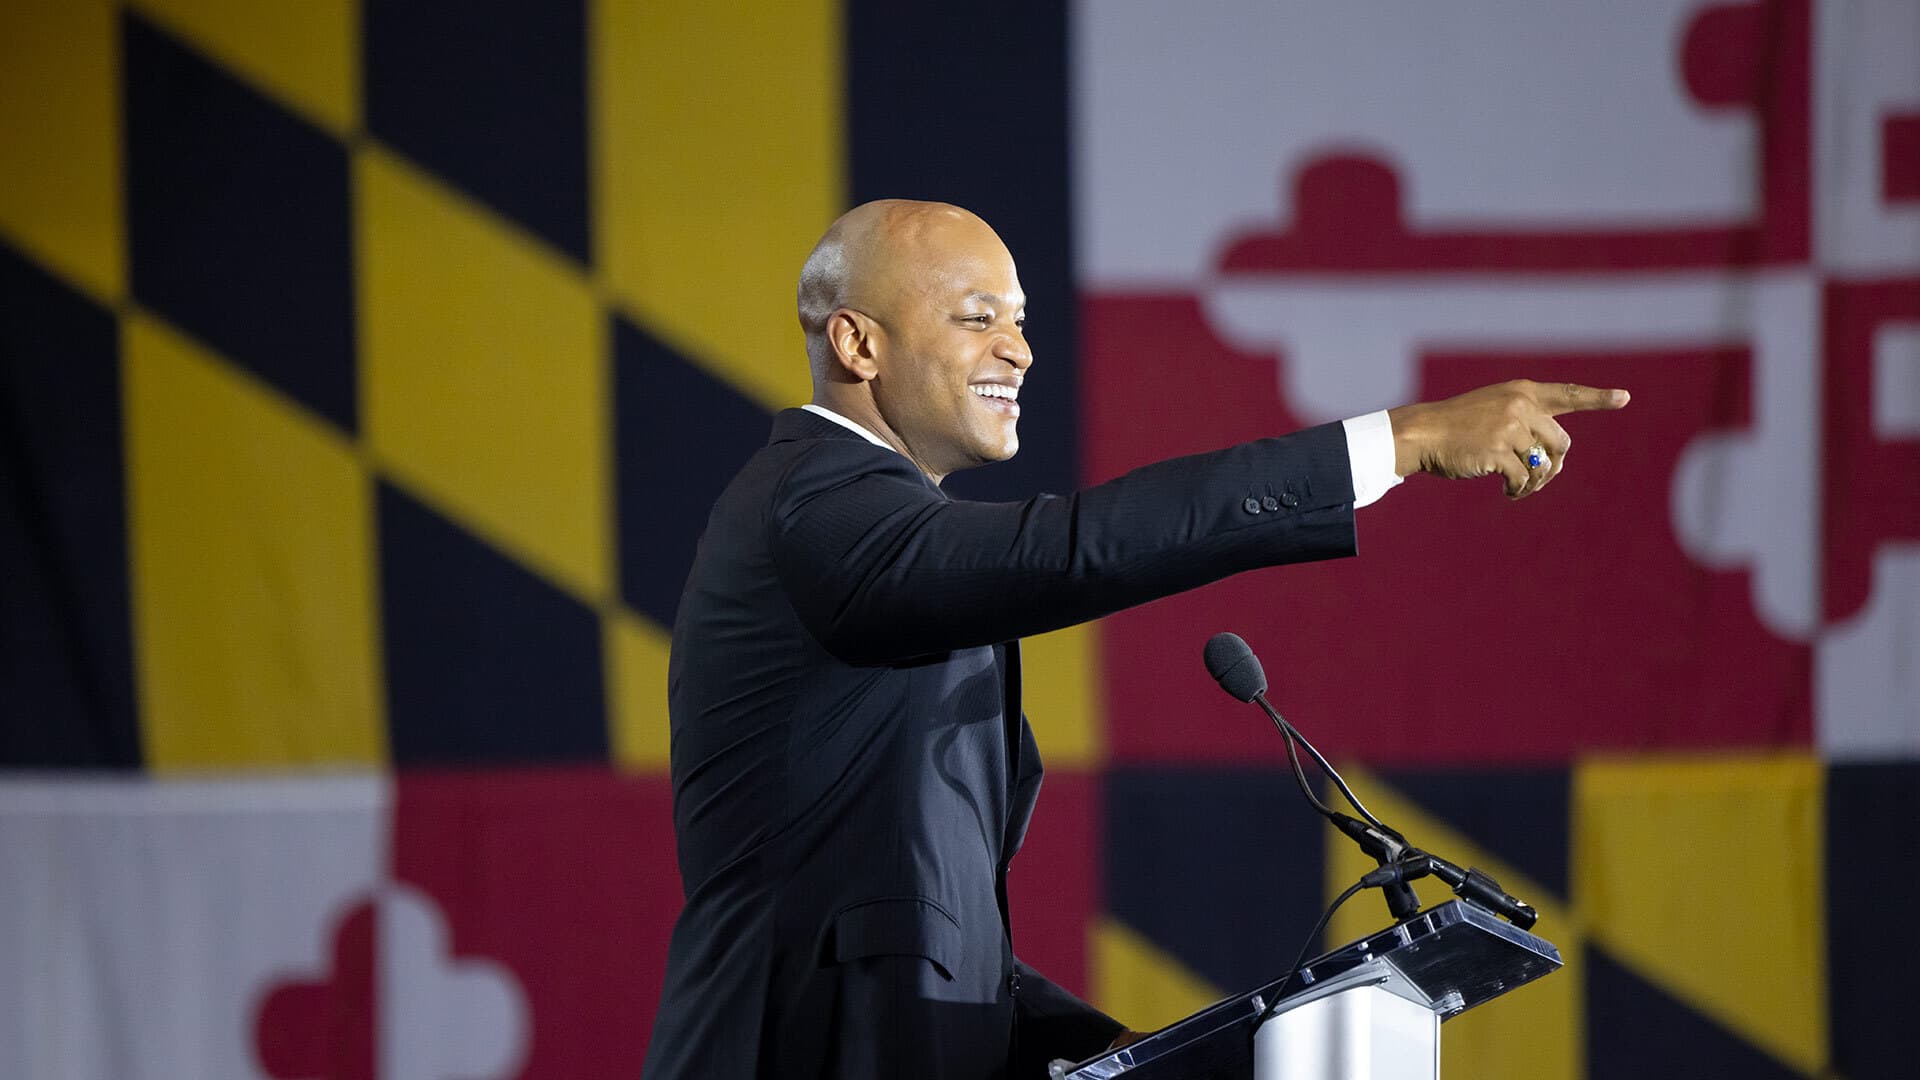 smiling man on stage in front of giant maryland flag points at audience